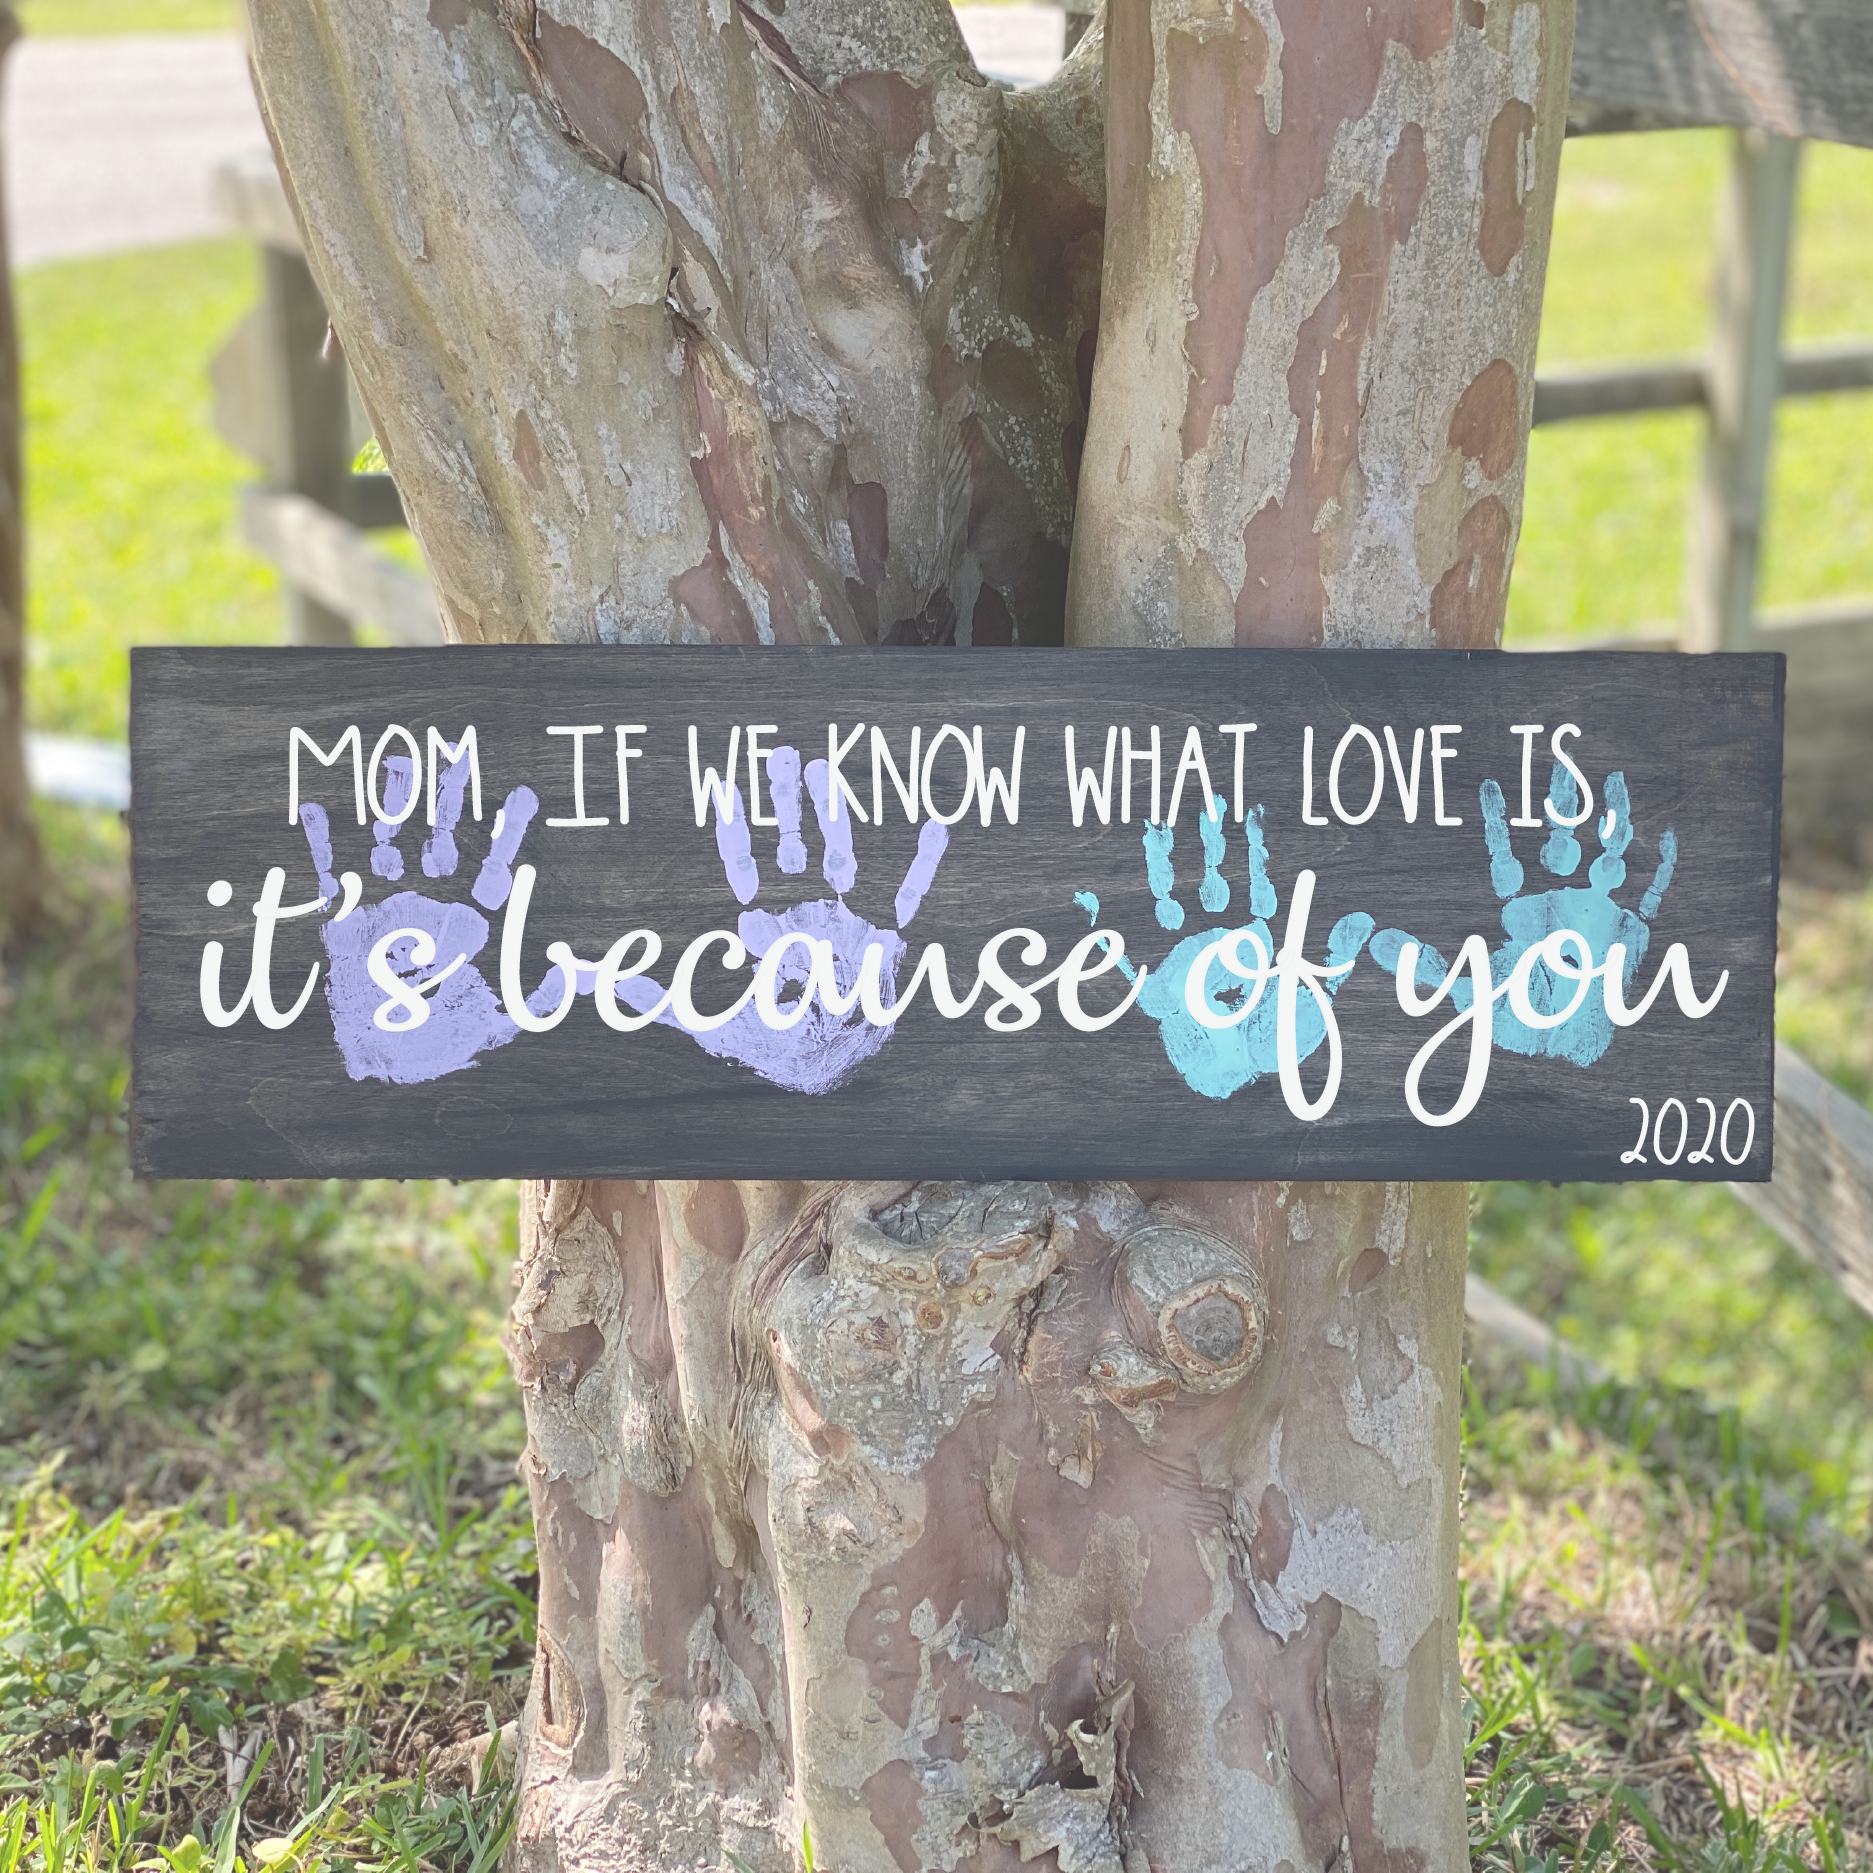 Mom, If we know what love is It's because of You: PLANK DESIGN - Paisley Grace Makery